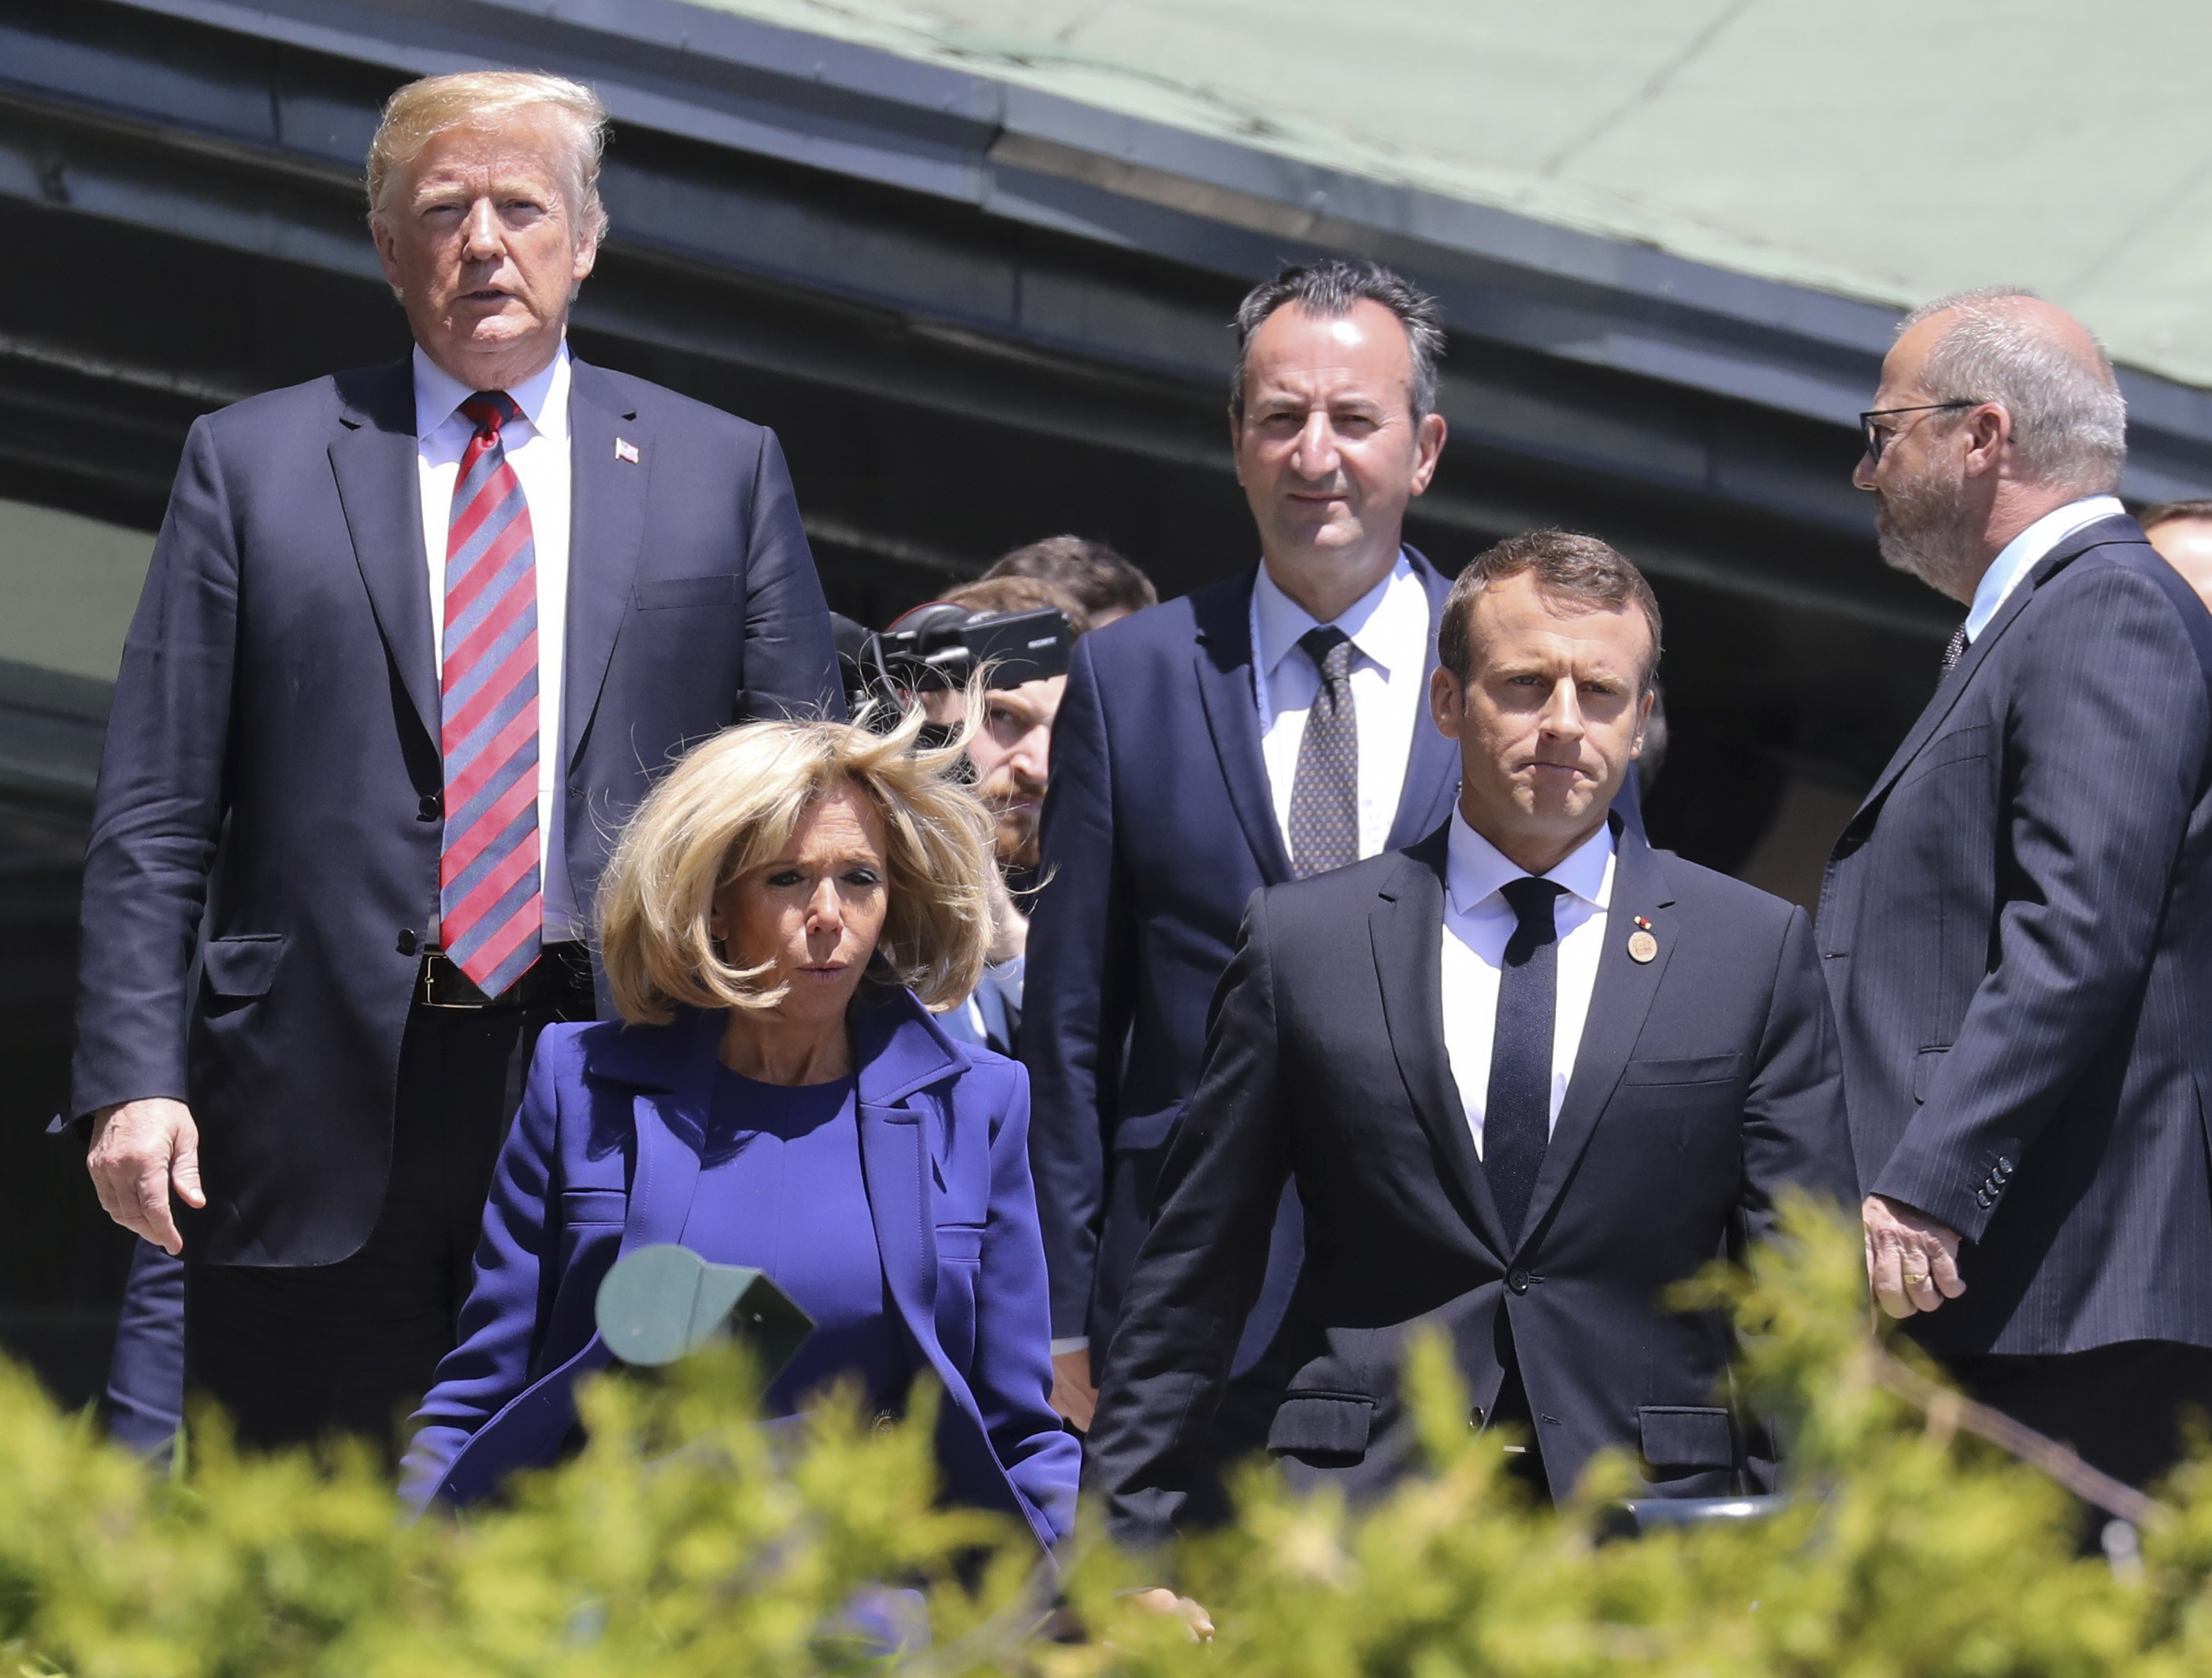 US President Trump (l.) and French President Emmanuel Macron (2nd r.) with his wife Brigitte Macron arrive in La Malbaie, Quebec.